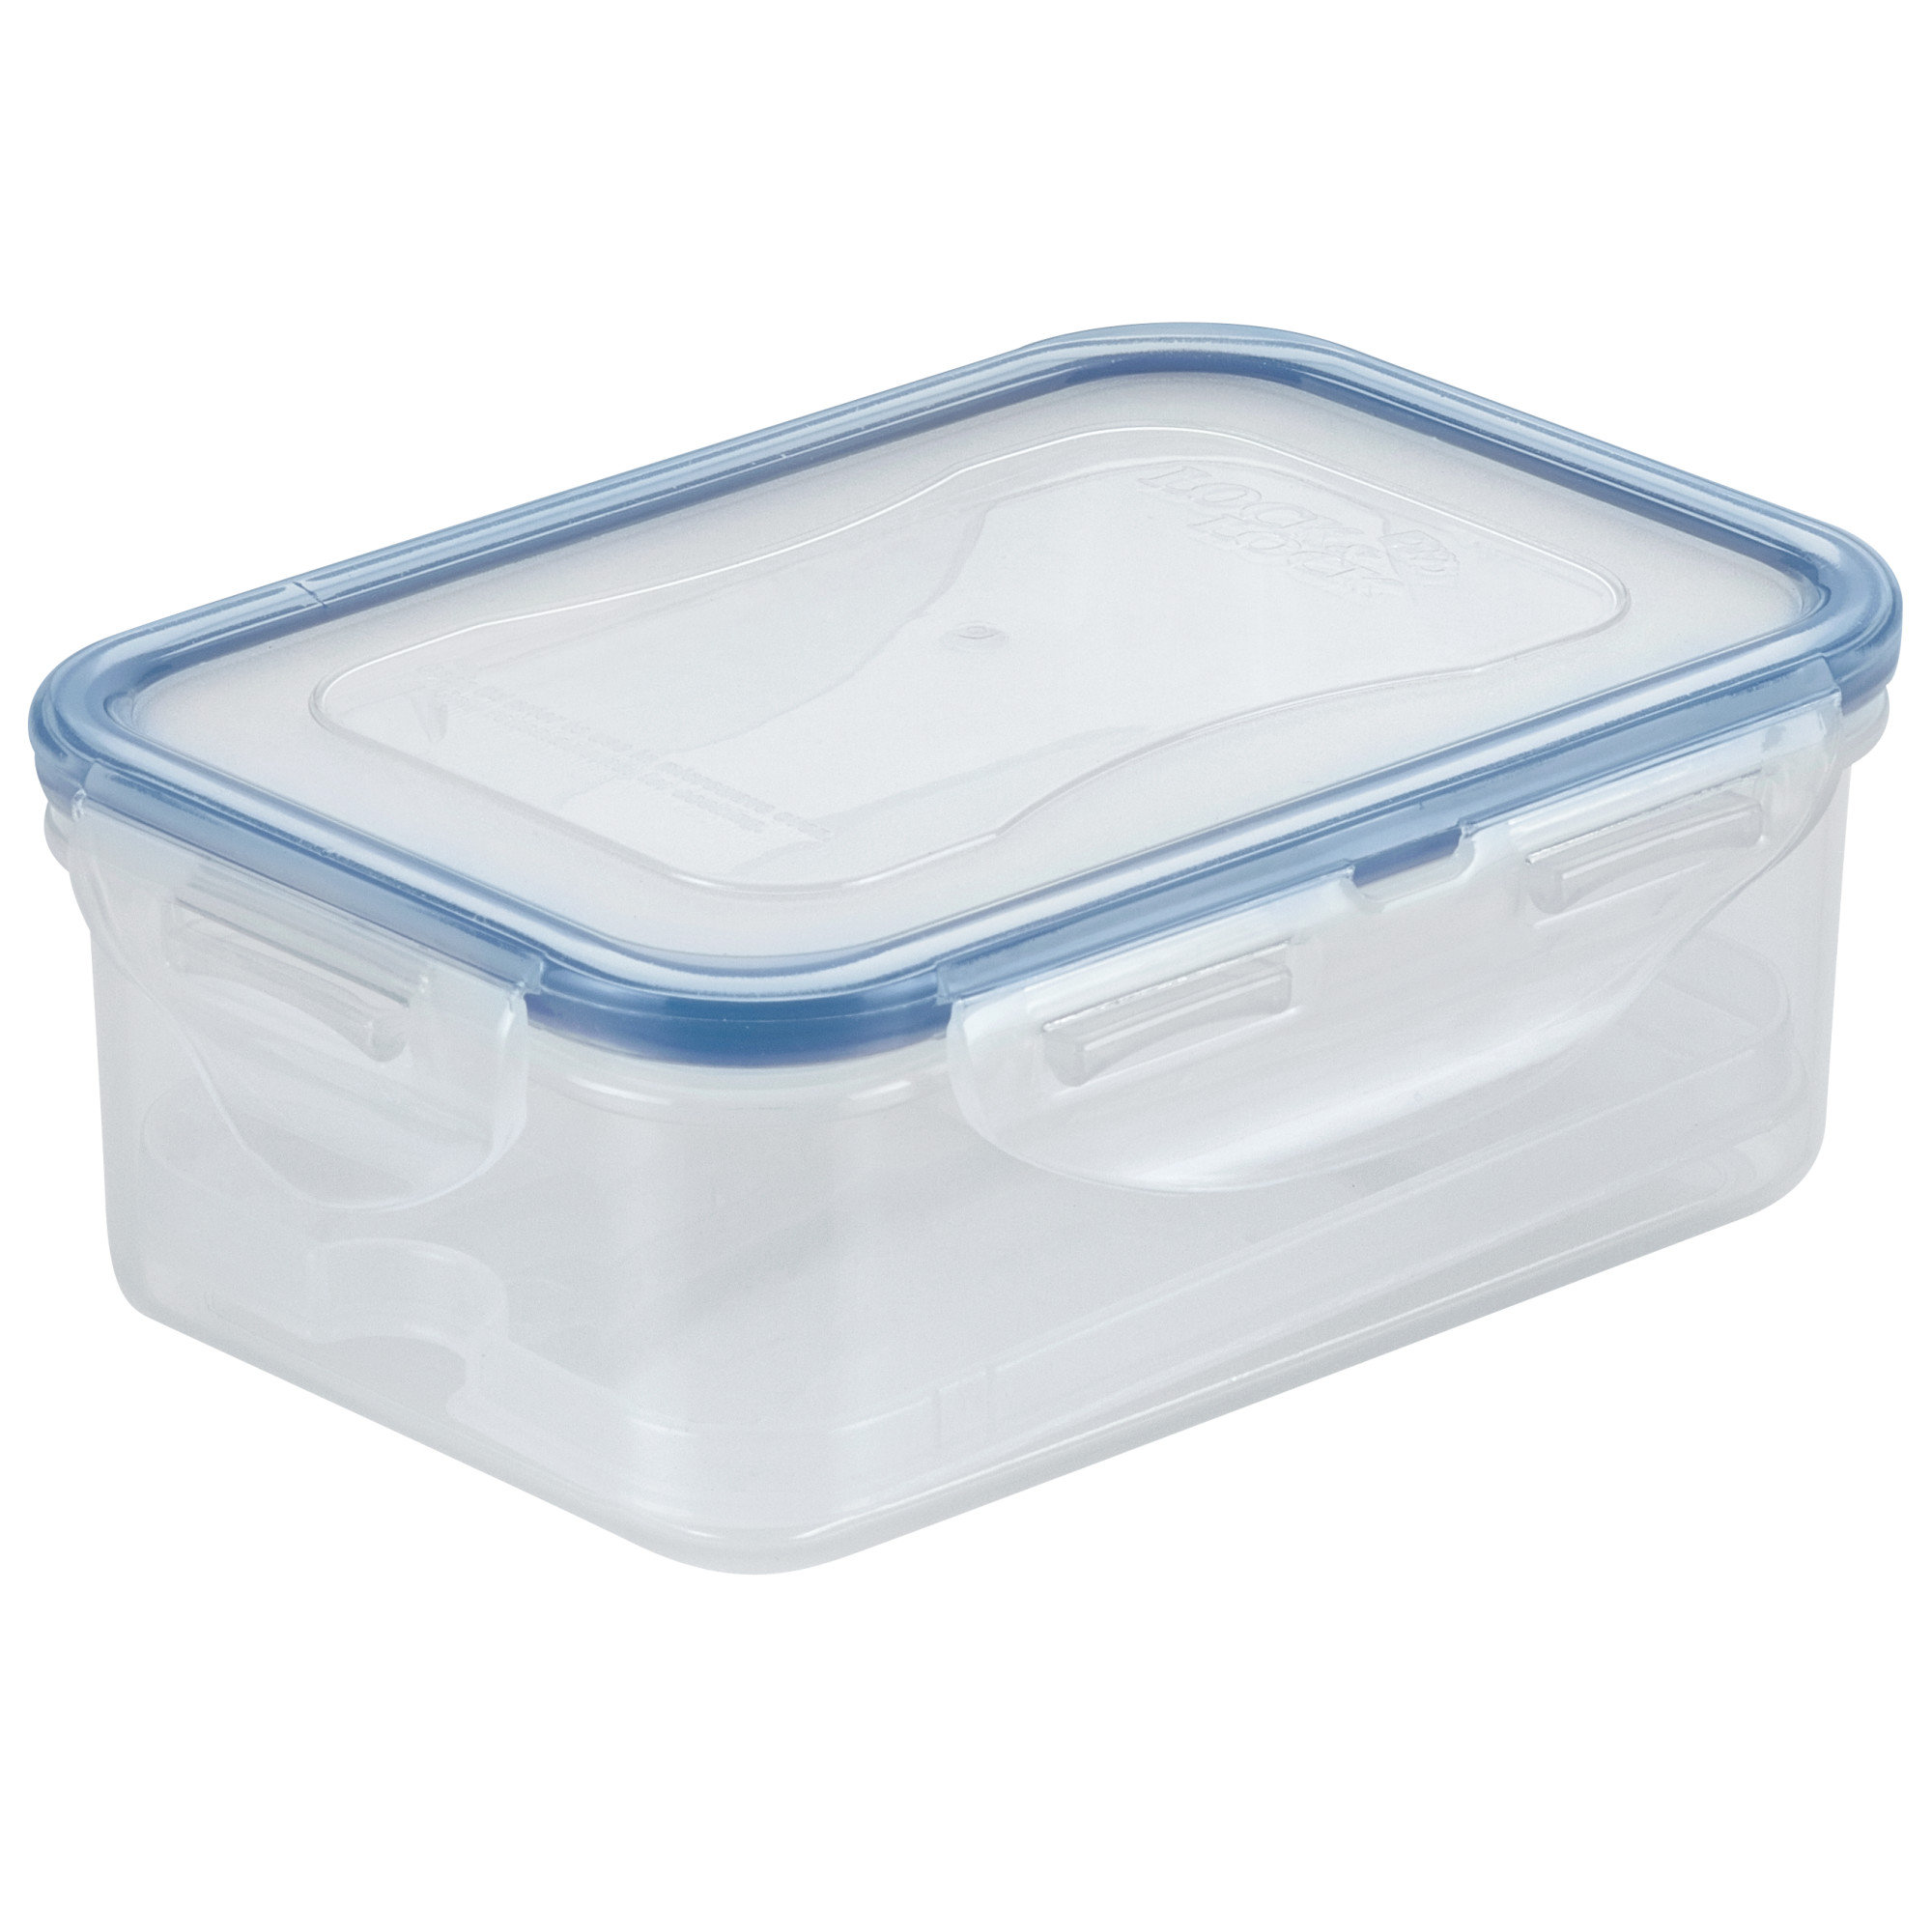 Lock&lock 16-Fluid Ounce Rectangular Food Container with Tray, Butter Keeper